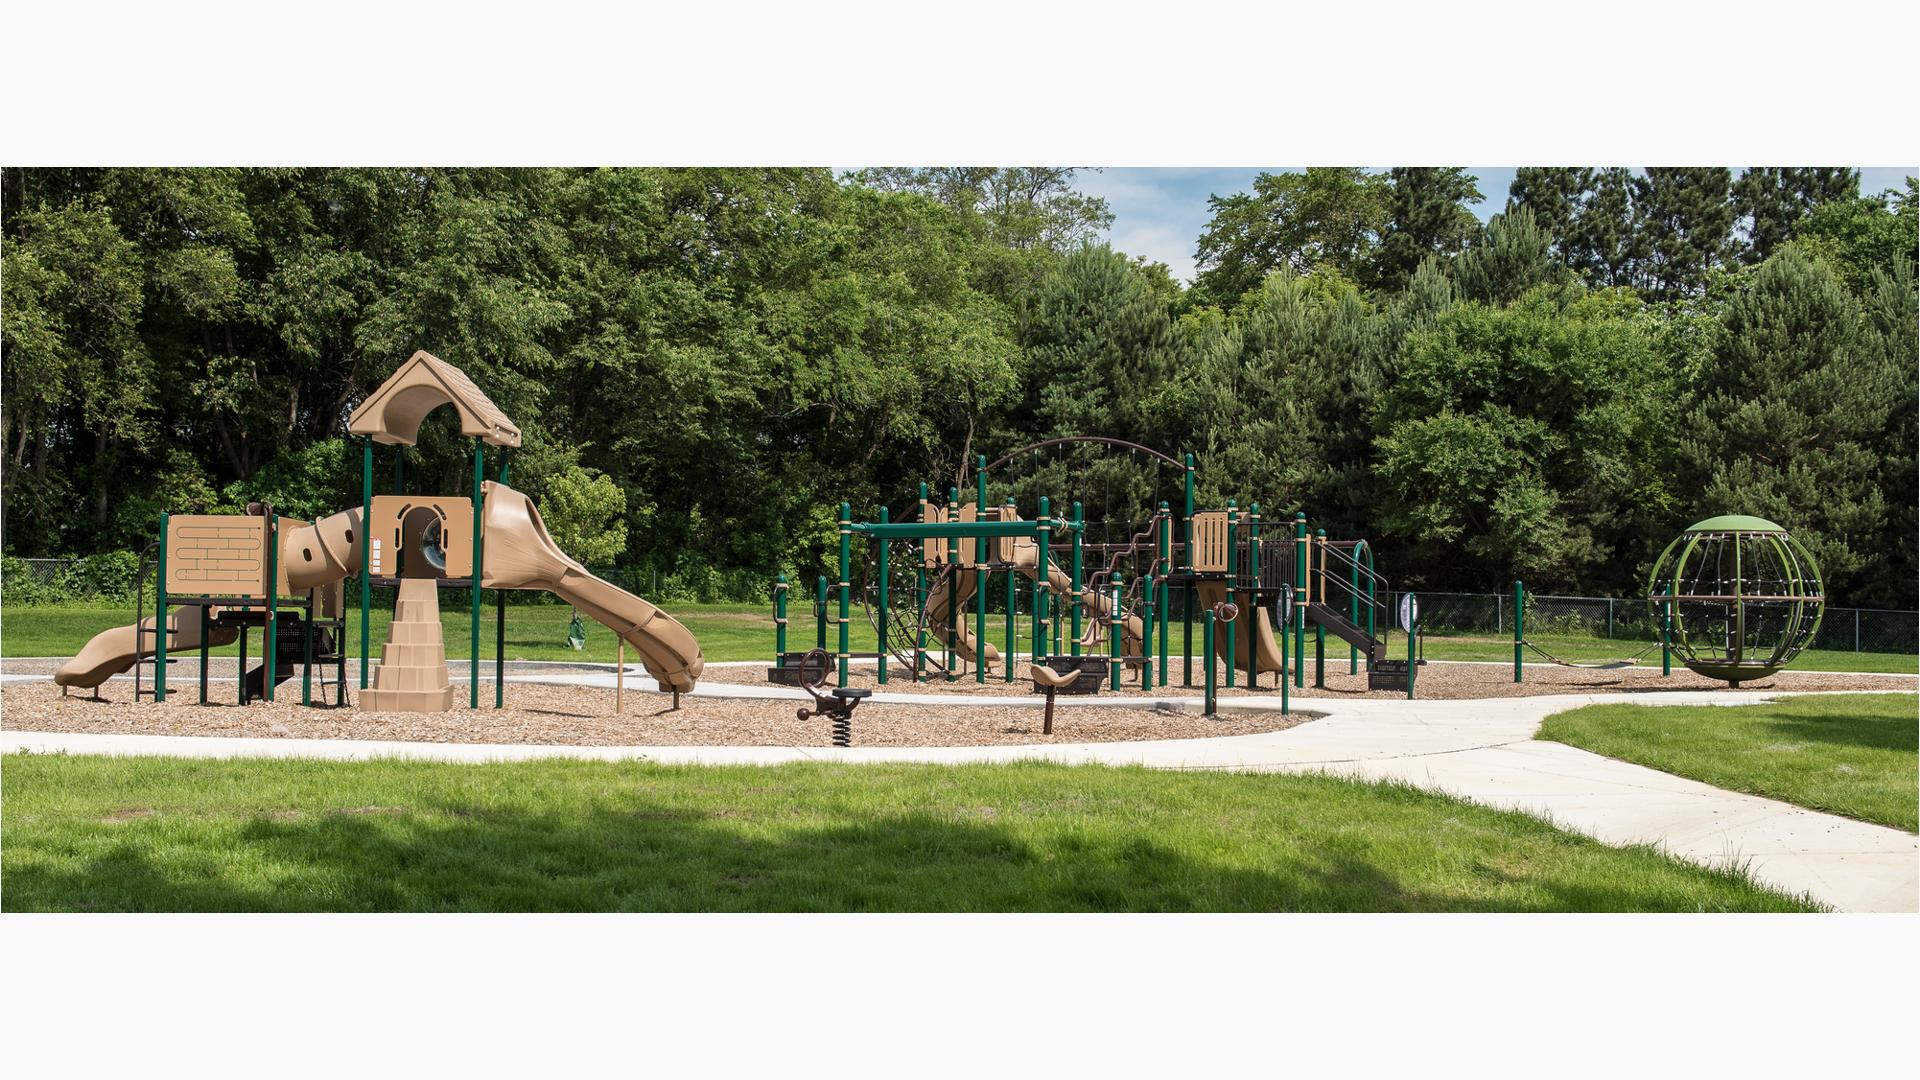 PlayBooster and Playshaper play systems at Shadow Woods Park. Freestanding Global Motin and other are present on the playground.